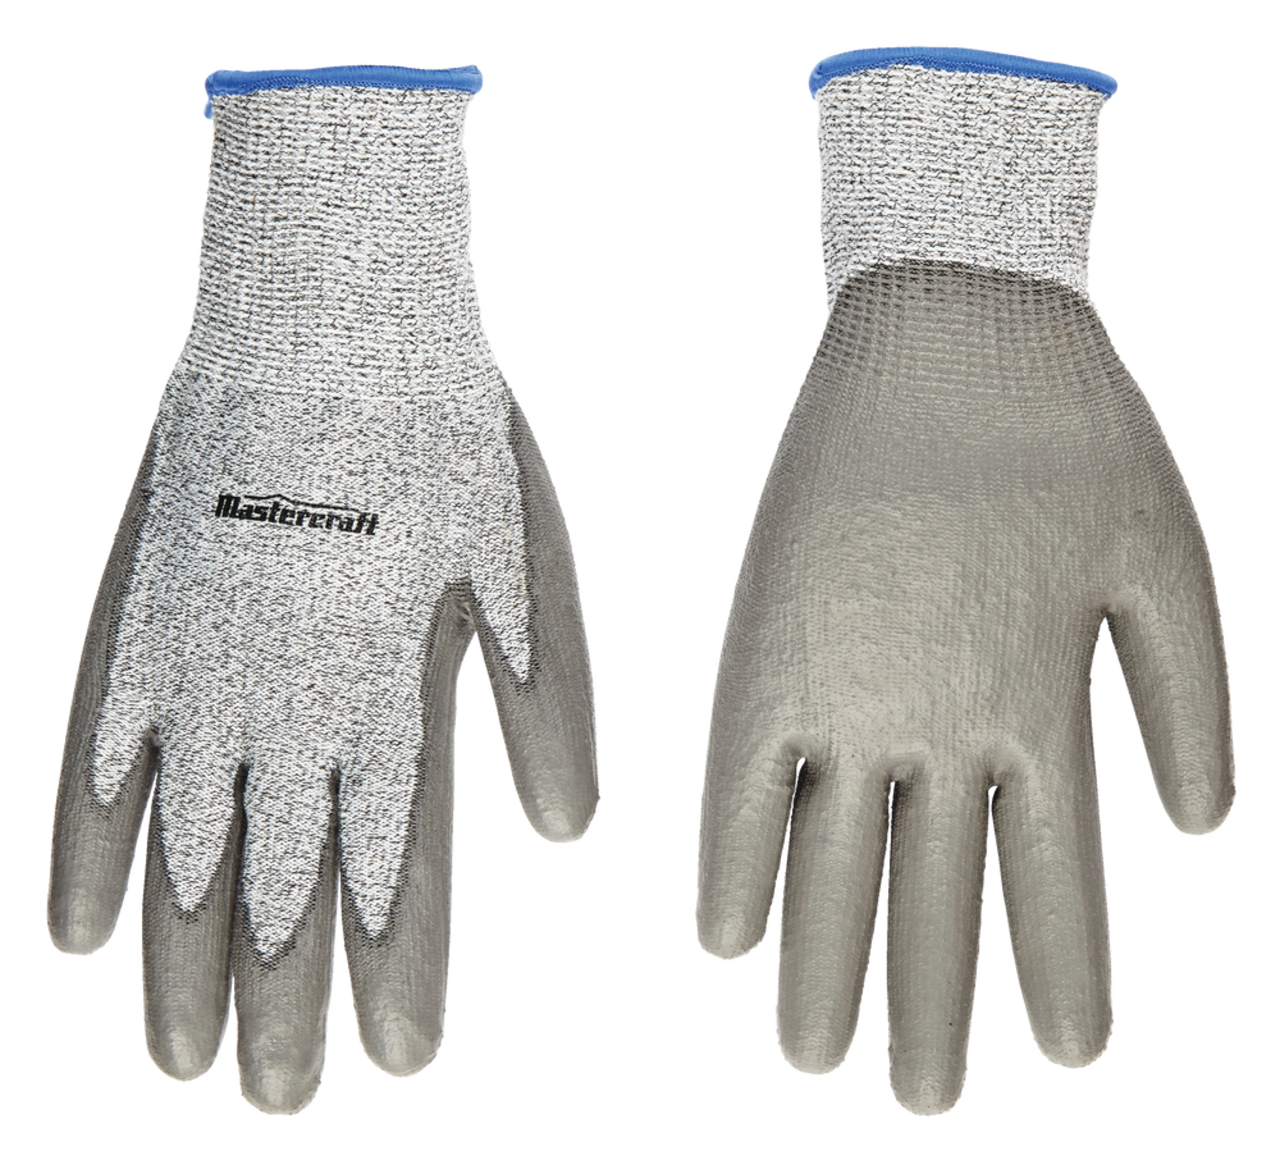 https://media-www.canadiantire.ca/product/fixing/tools/cutting-measuring/0570258/mastercraft-pu-dipped-cut-resistant-glove-medium-d992731f-4a7e-4efc-8e7a-fc2170c3b5dc.png?imdensity=1&imwidth=1244&impolicy=mZoom